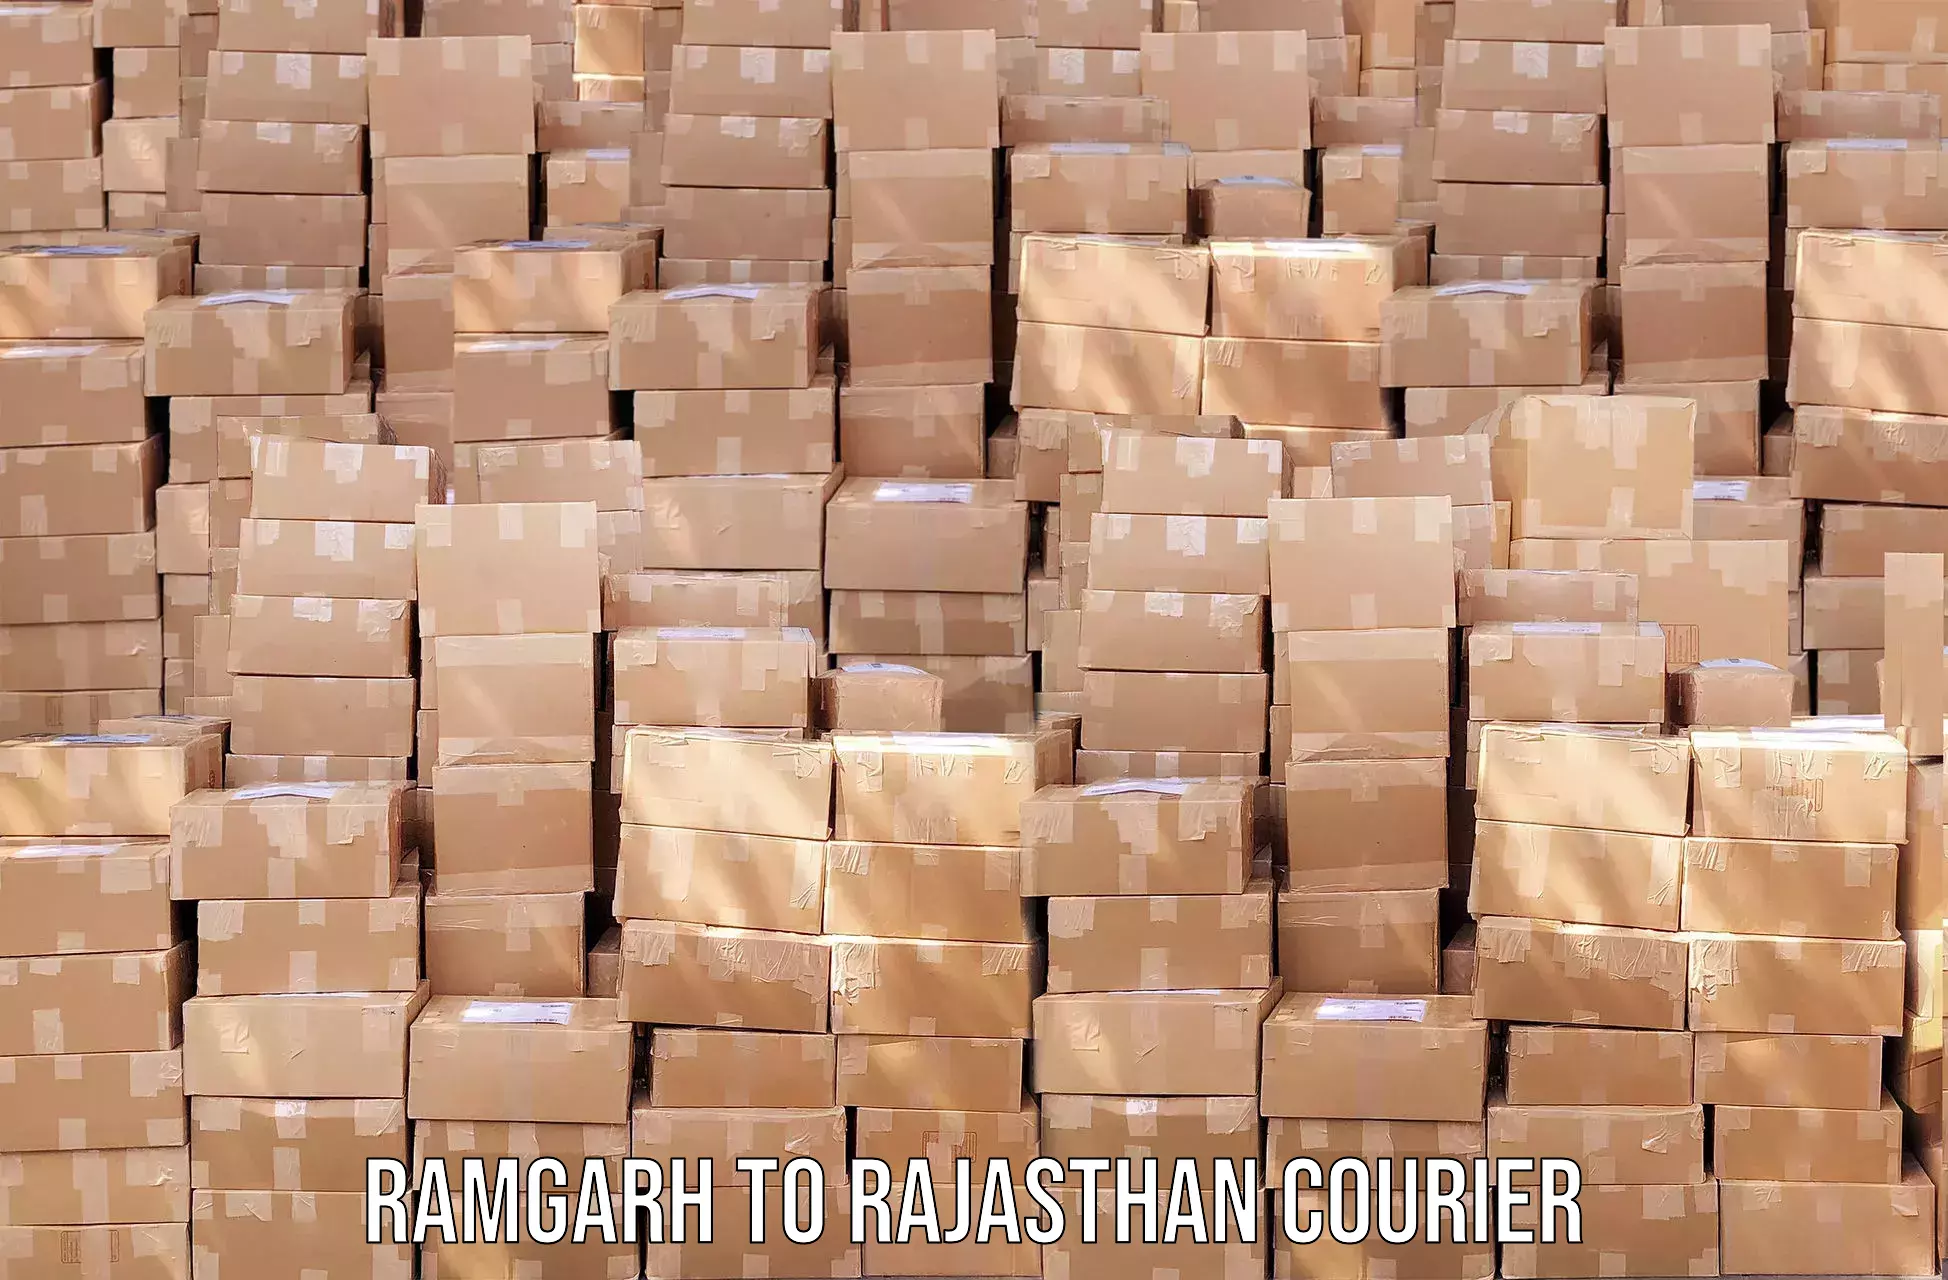 Easy access courier services in Ramgarh to Degana